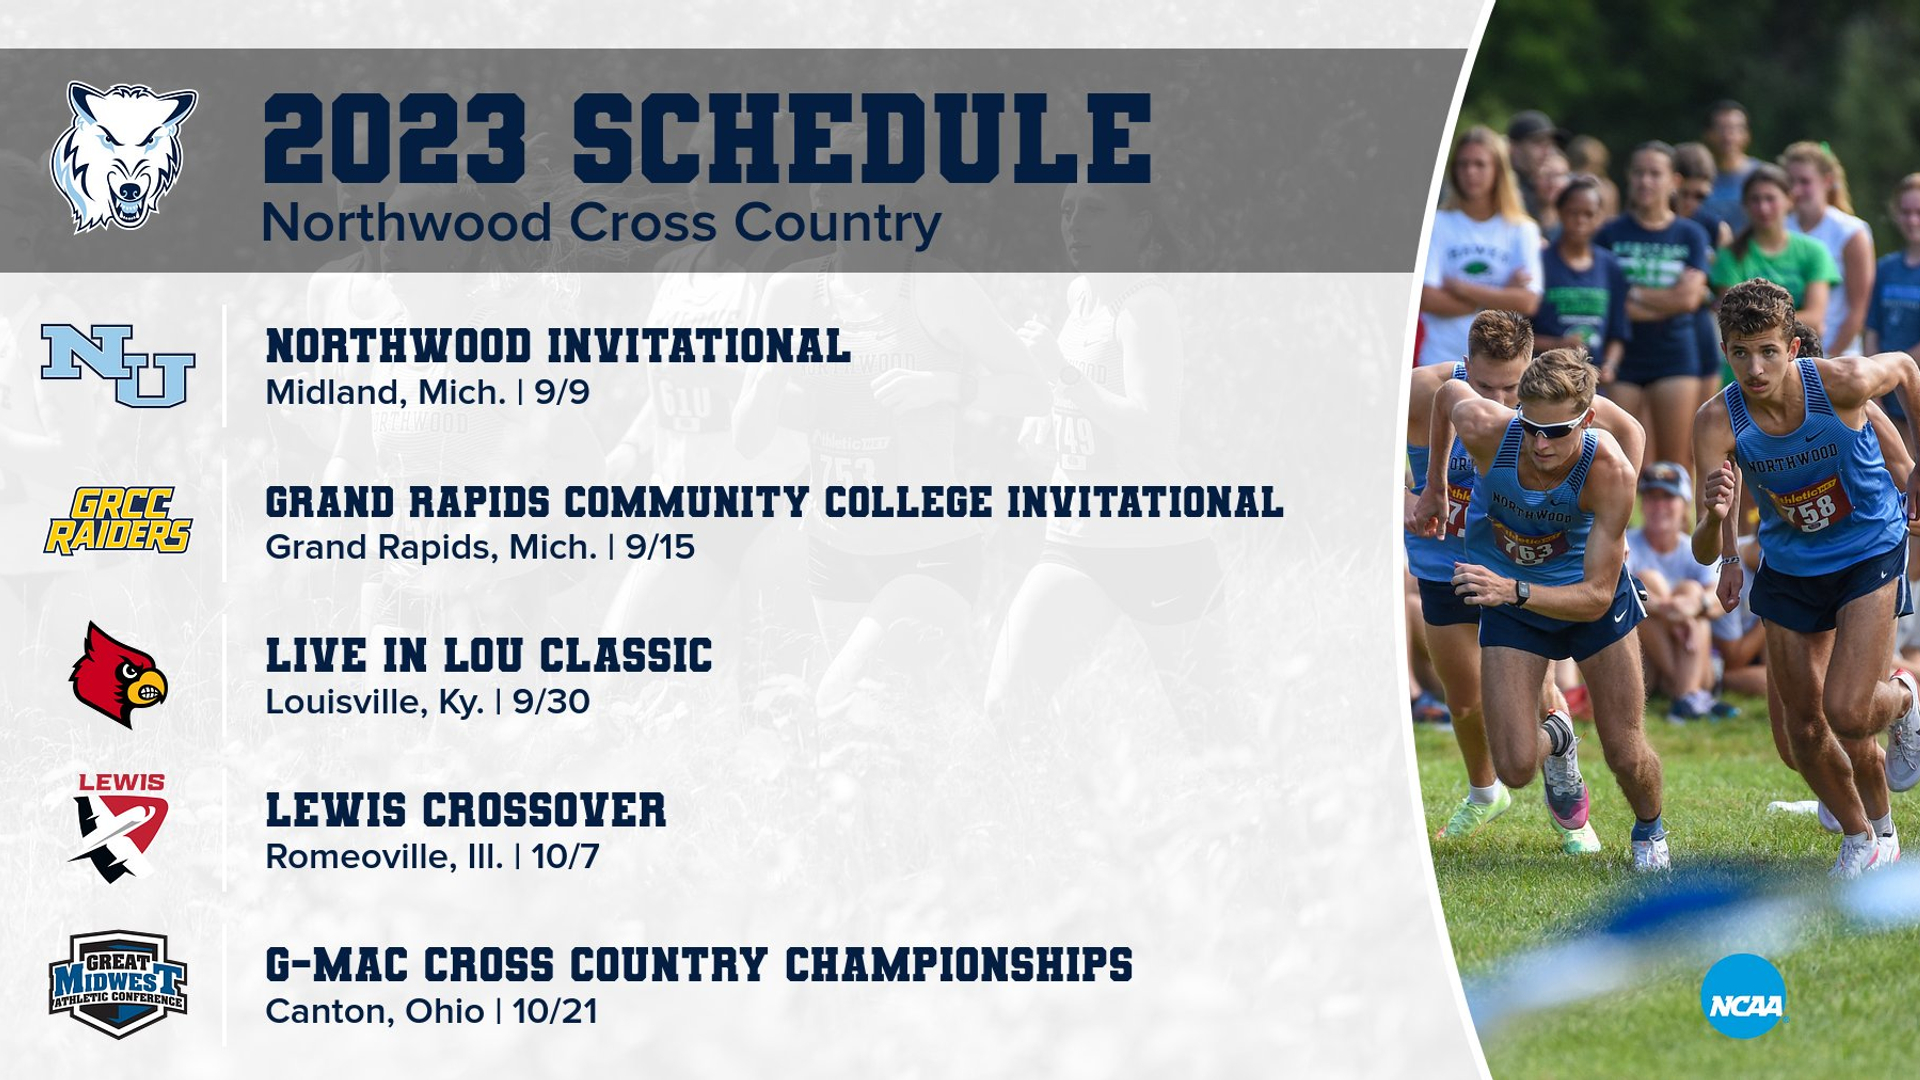 Northwood Cross Country Gears Up For Their 2023 Schedule